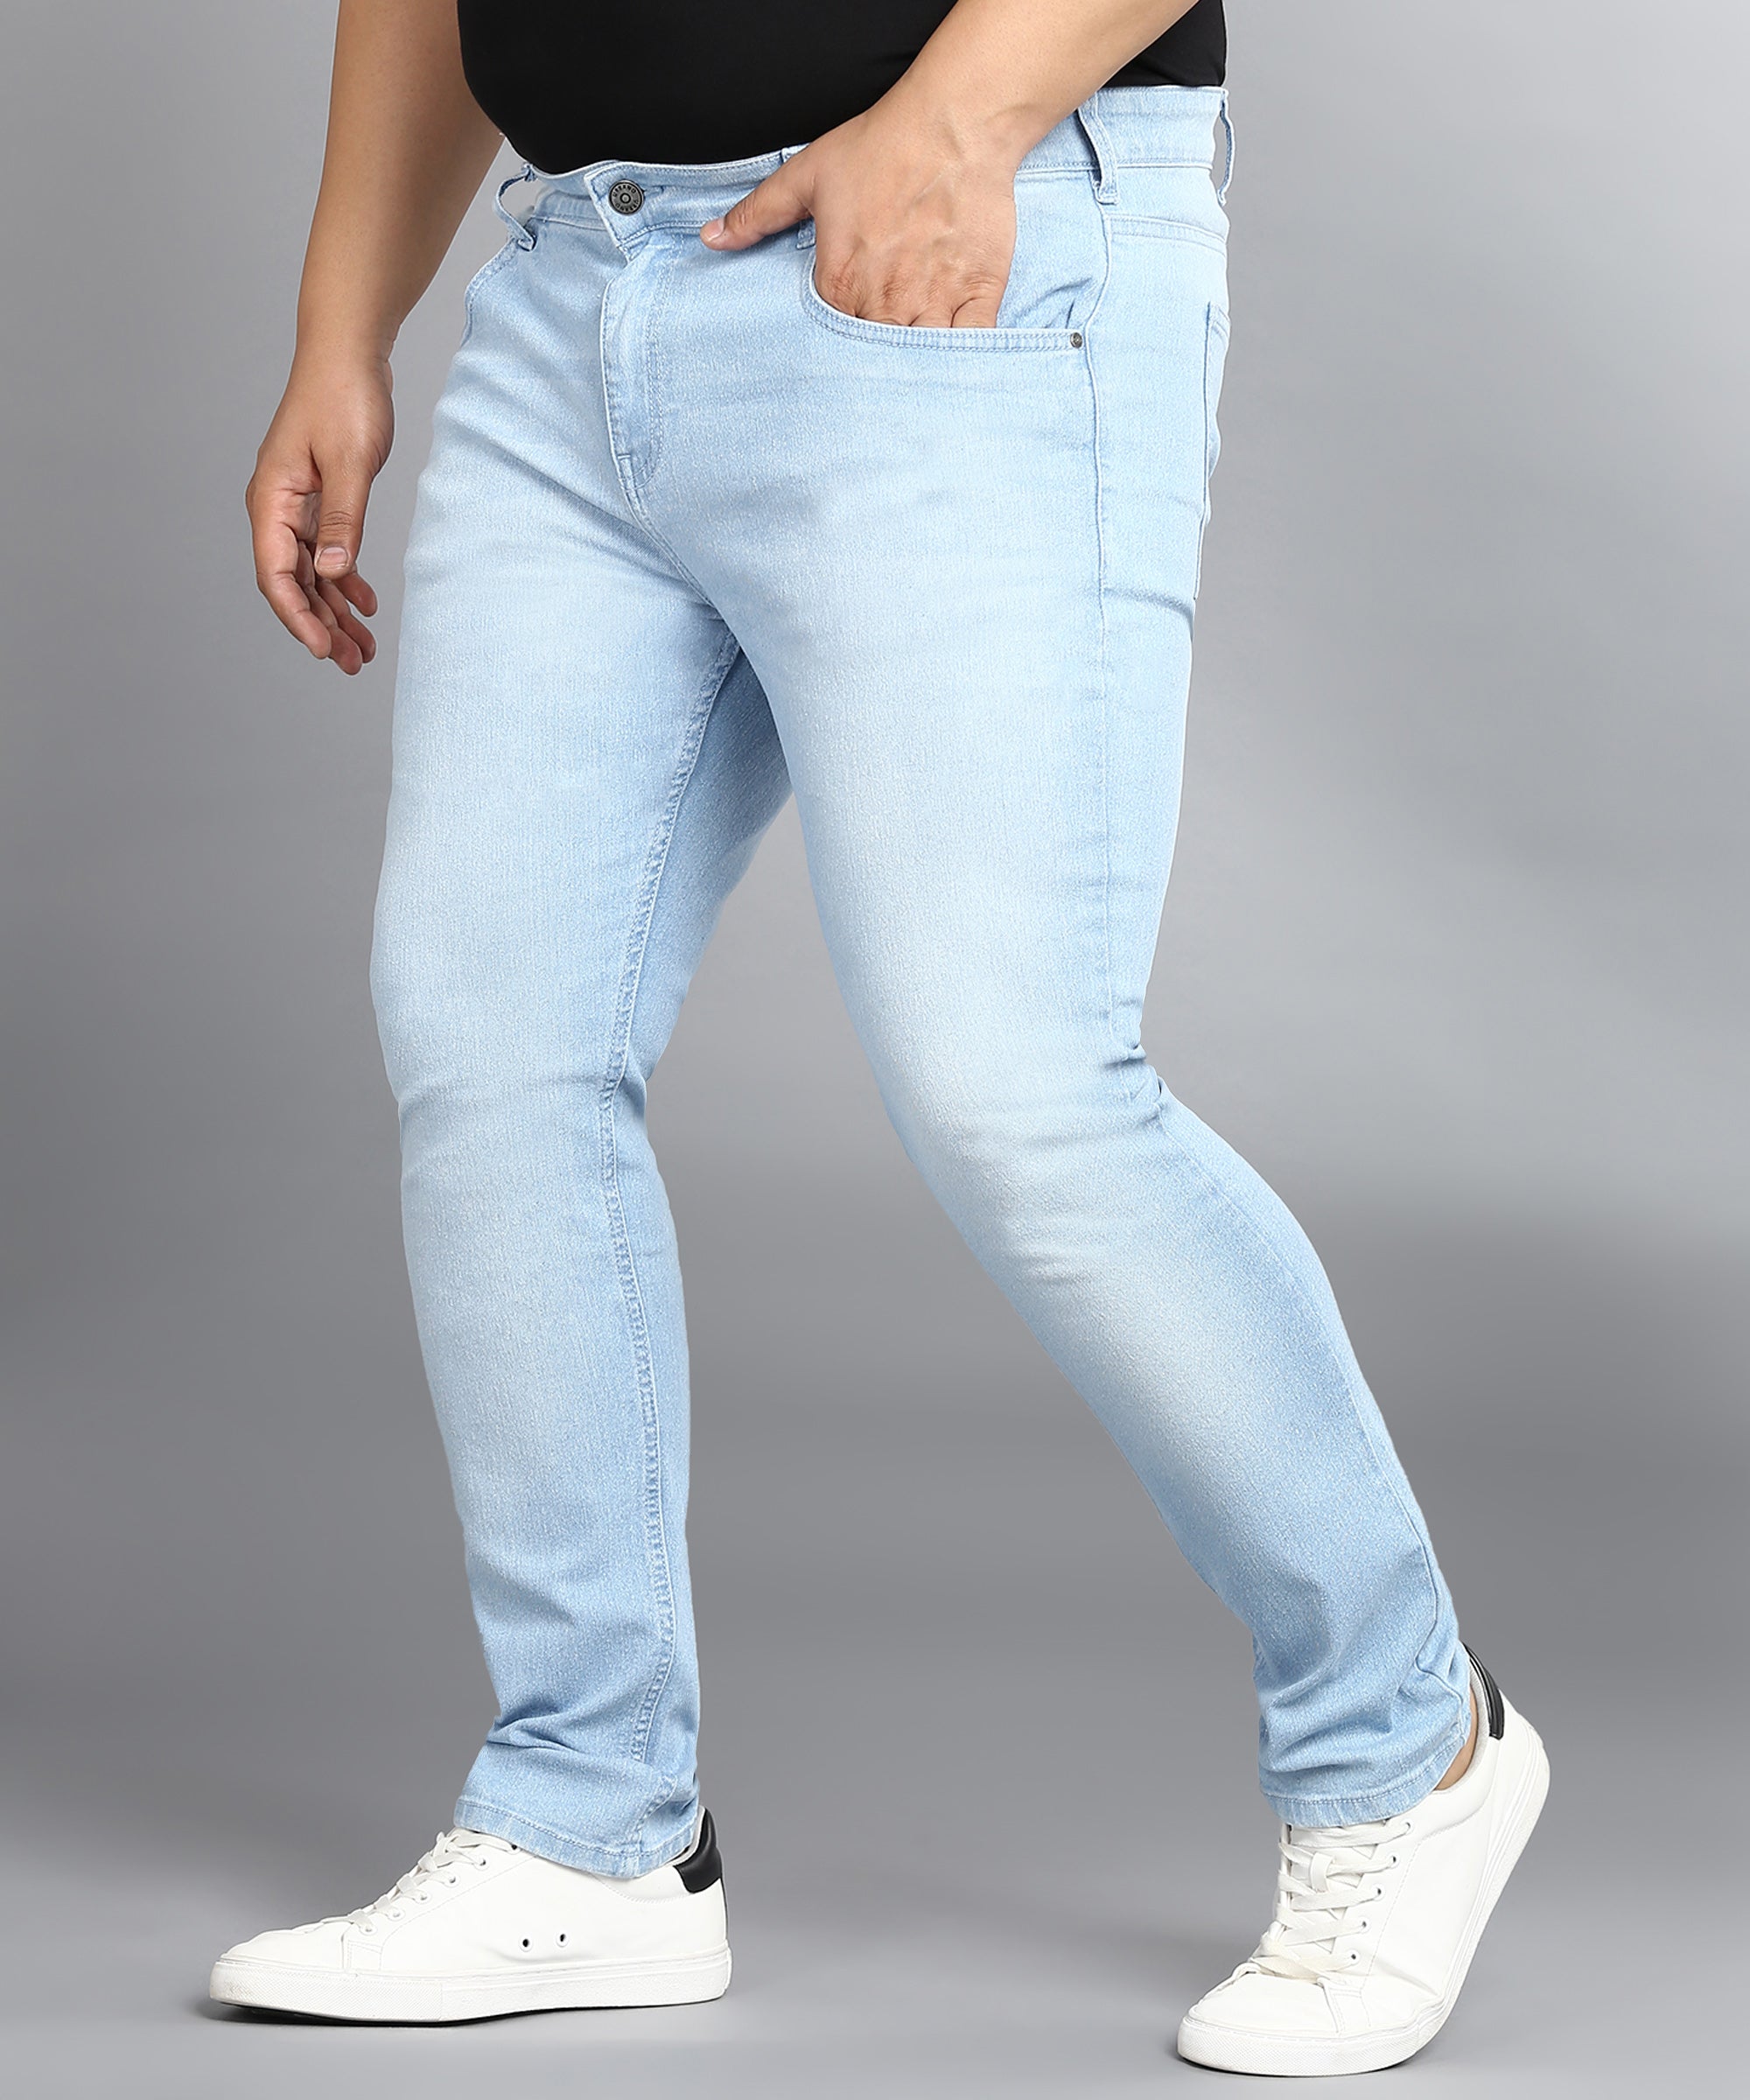 Urbano Plus Men's Ice Blue Regular Fit Washed Jeans Stretchable